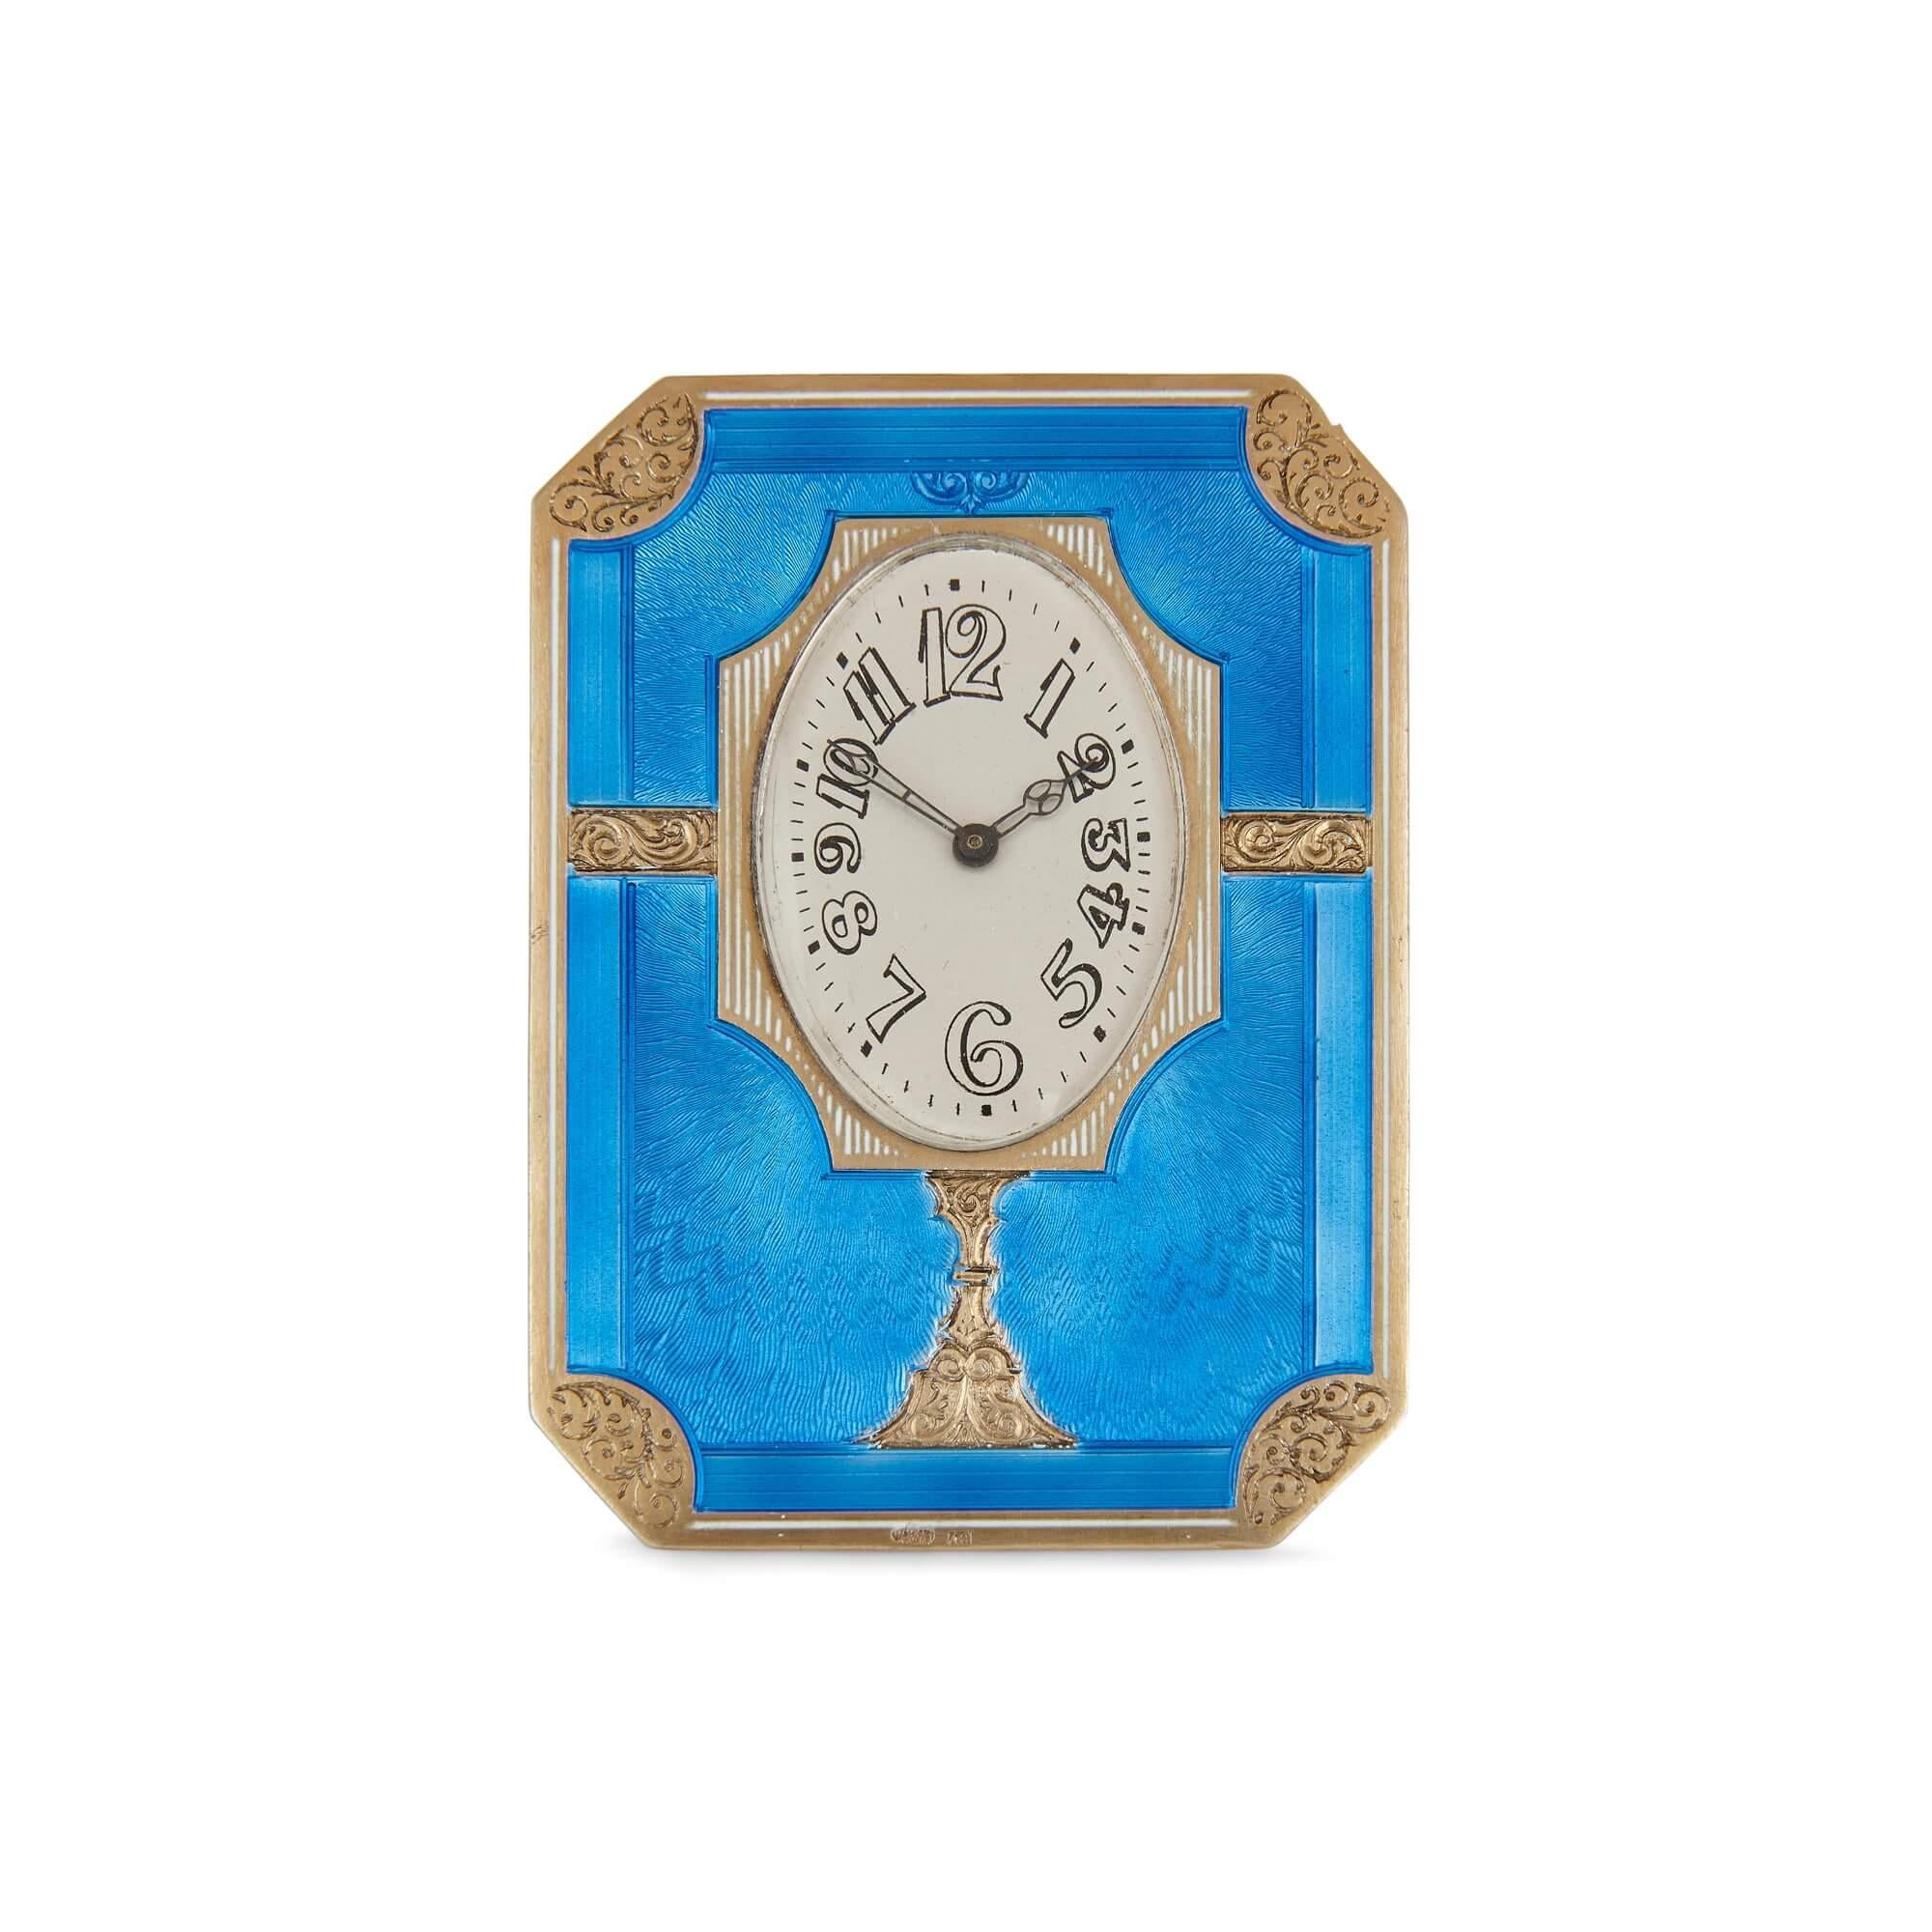 Antique Russian vermeil and enamel table clock
Russian, early 20th Century
Clock: Height 8cm, width 6cm, depth 7cm
Case: Height 4cm, width 8.5cm, depth 11cm

This exquisite Russian table clock is crafted of vermeil and turquoise guilloche enamel.